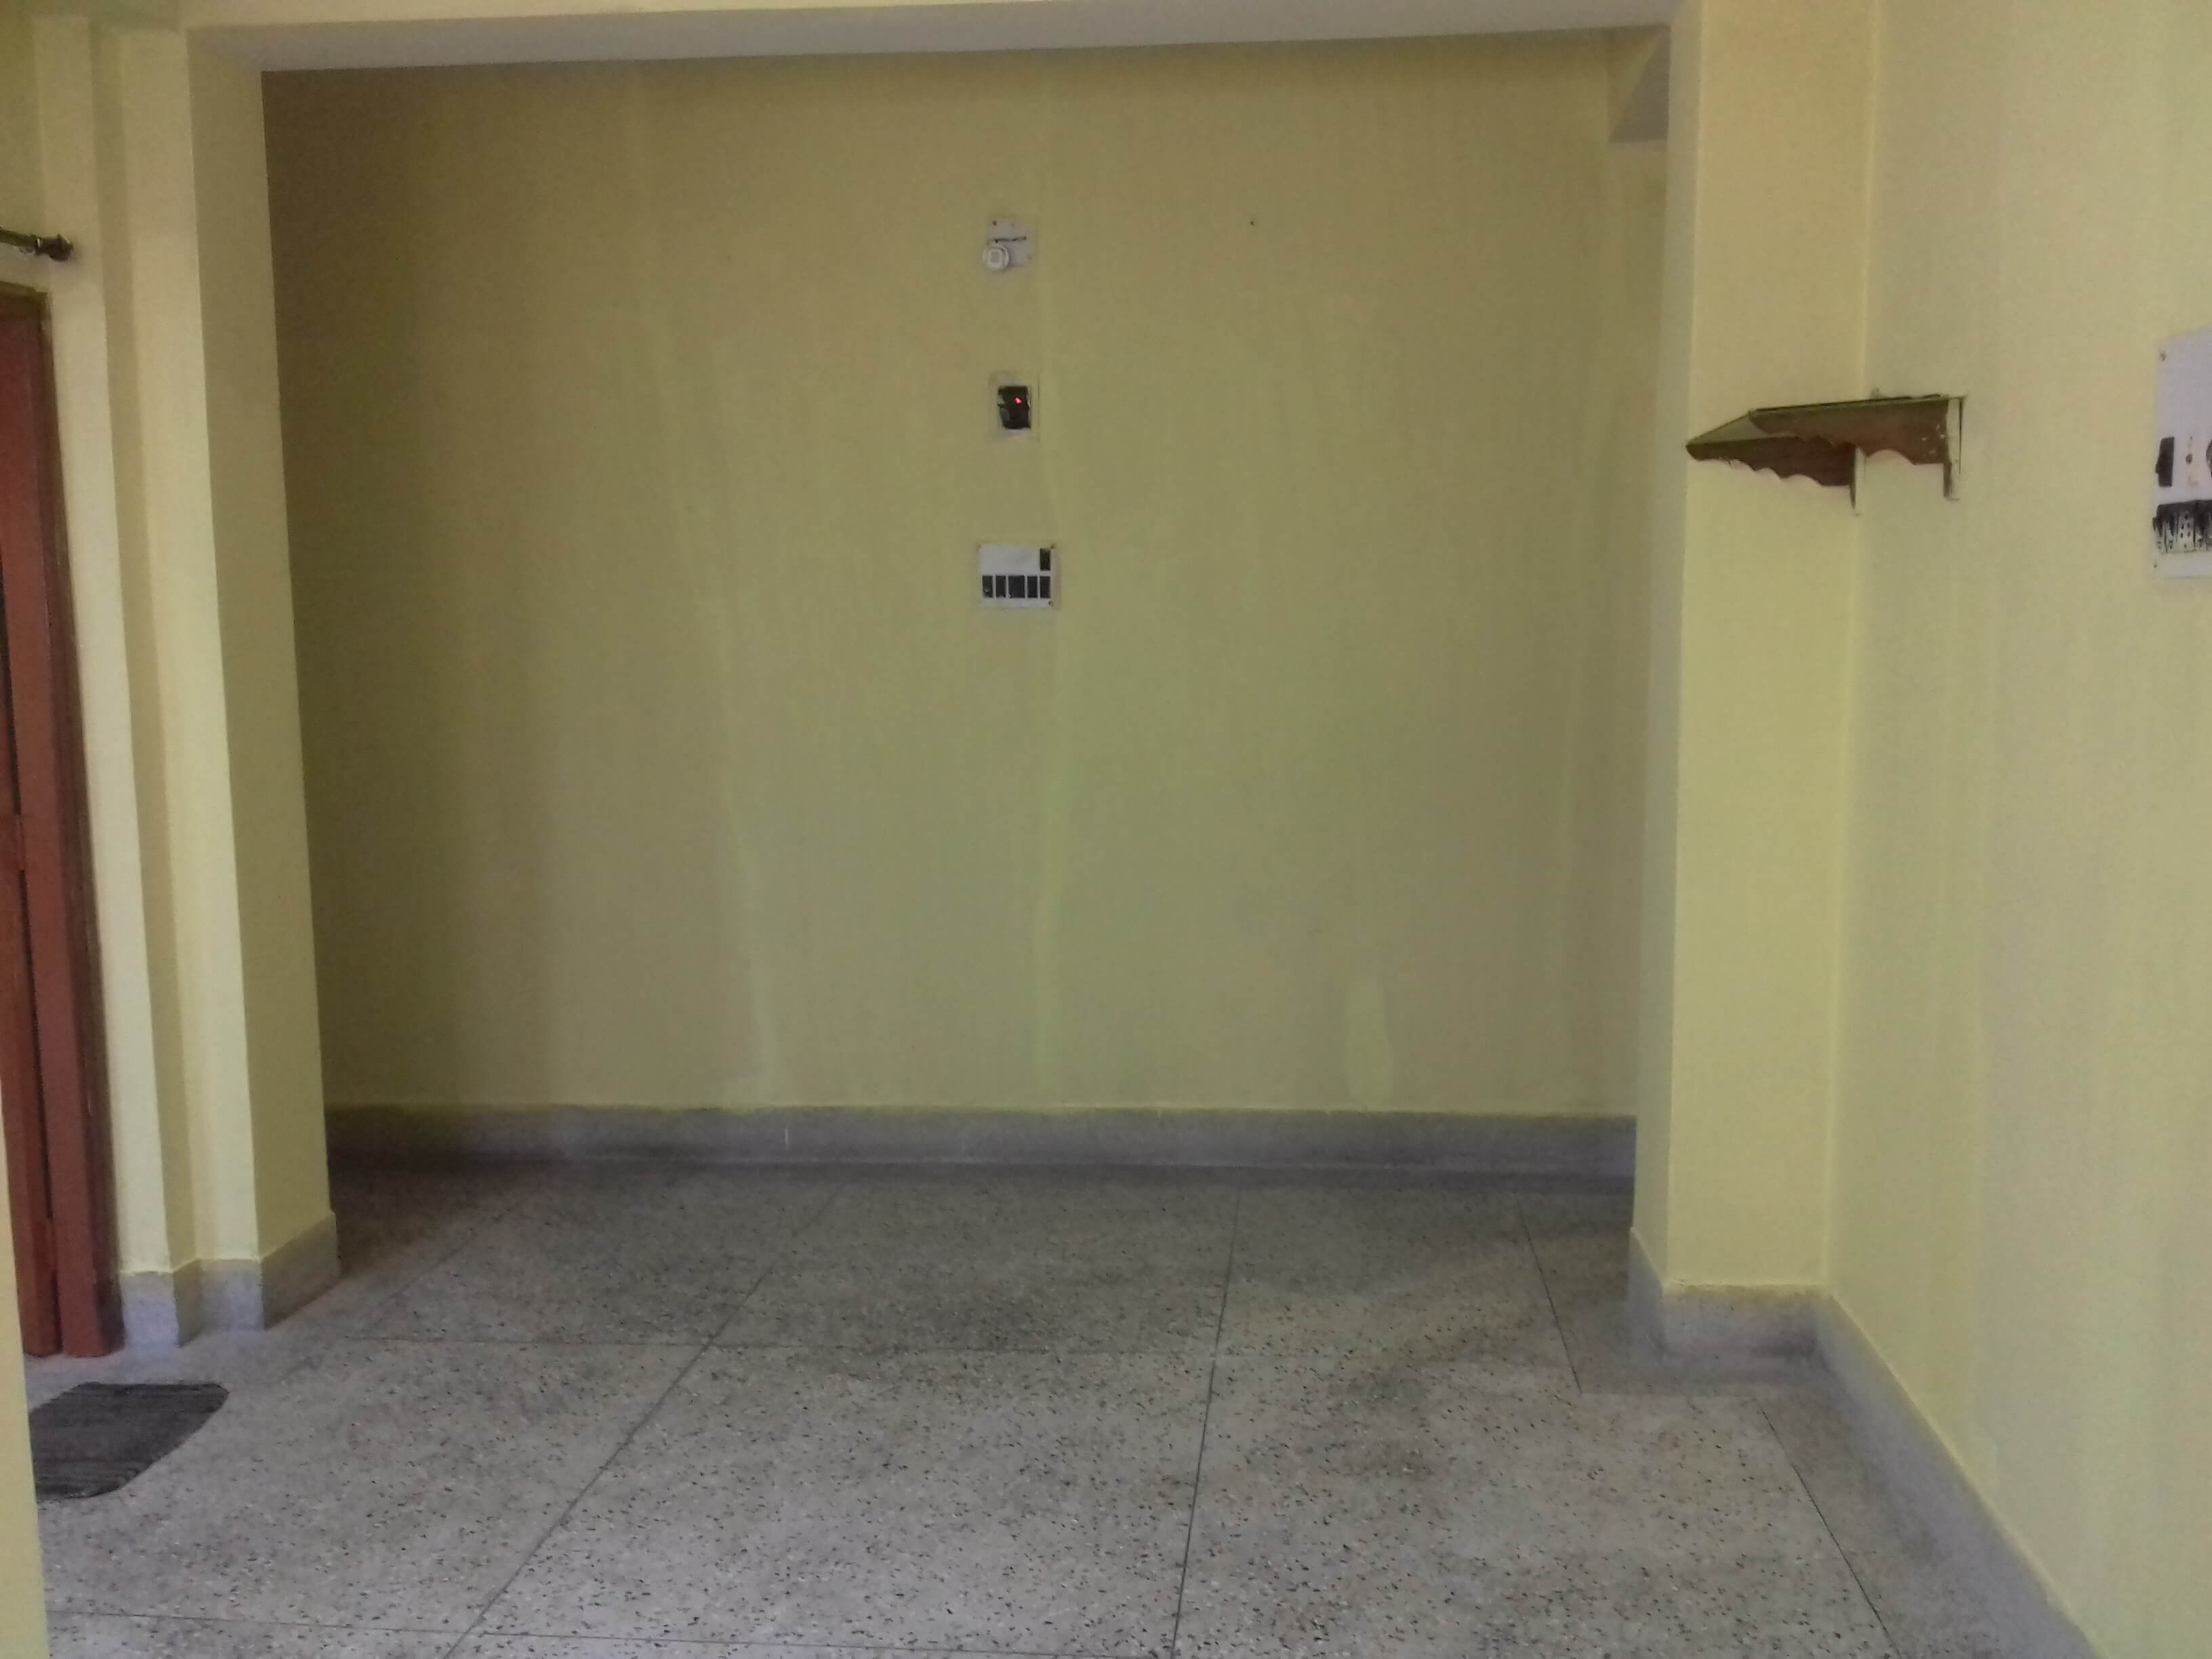 Flat For Rent in Nager Bazar Kolkata (Id: 11019)